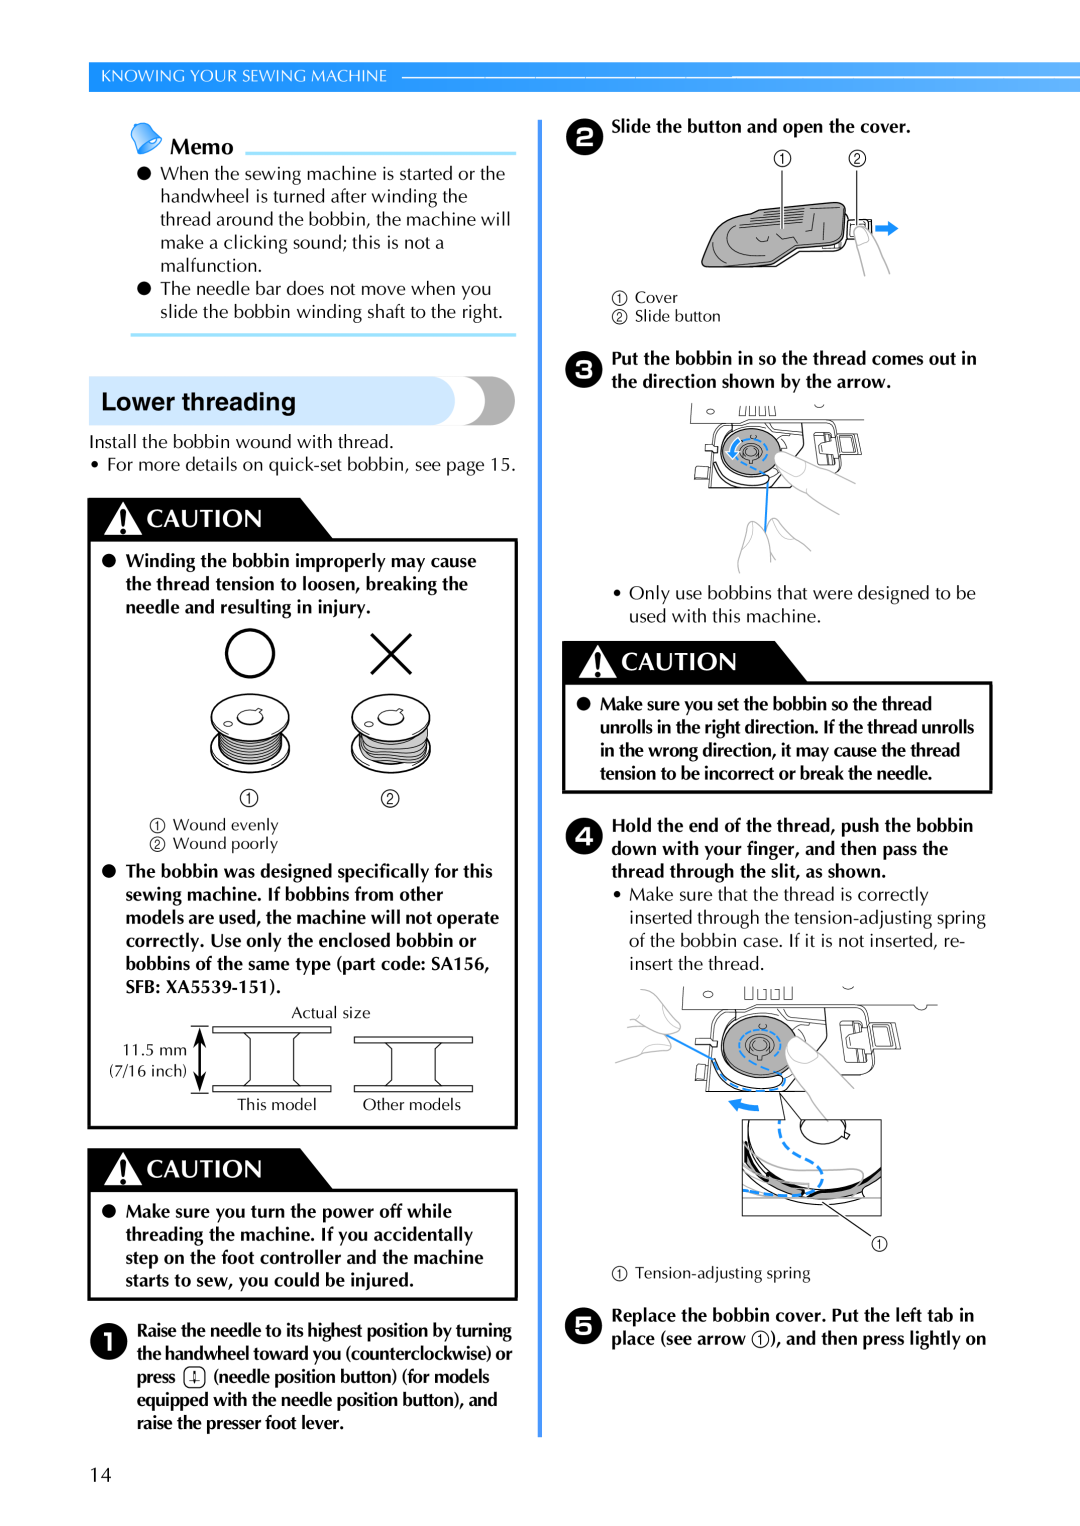 Brother CE 500PRW operation manual Lower threading, Memo 